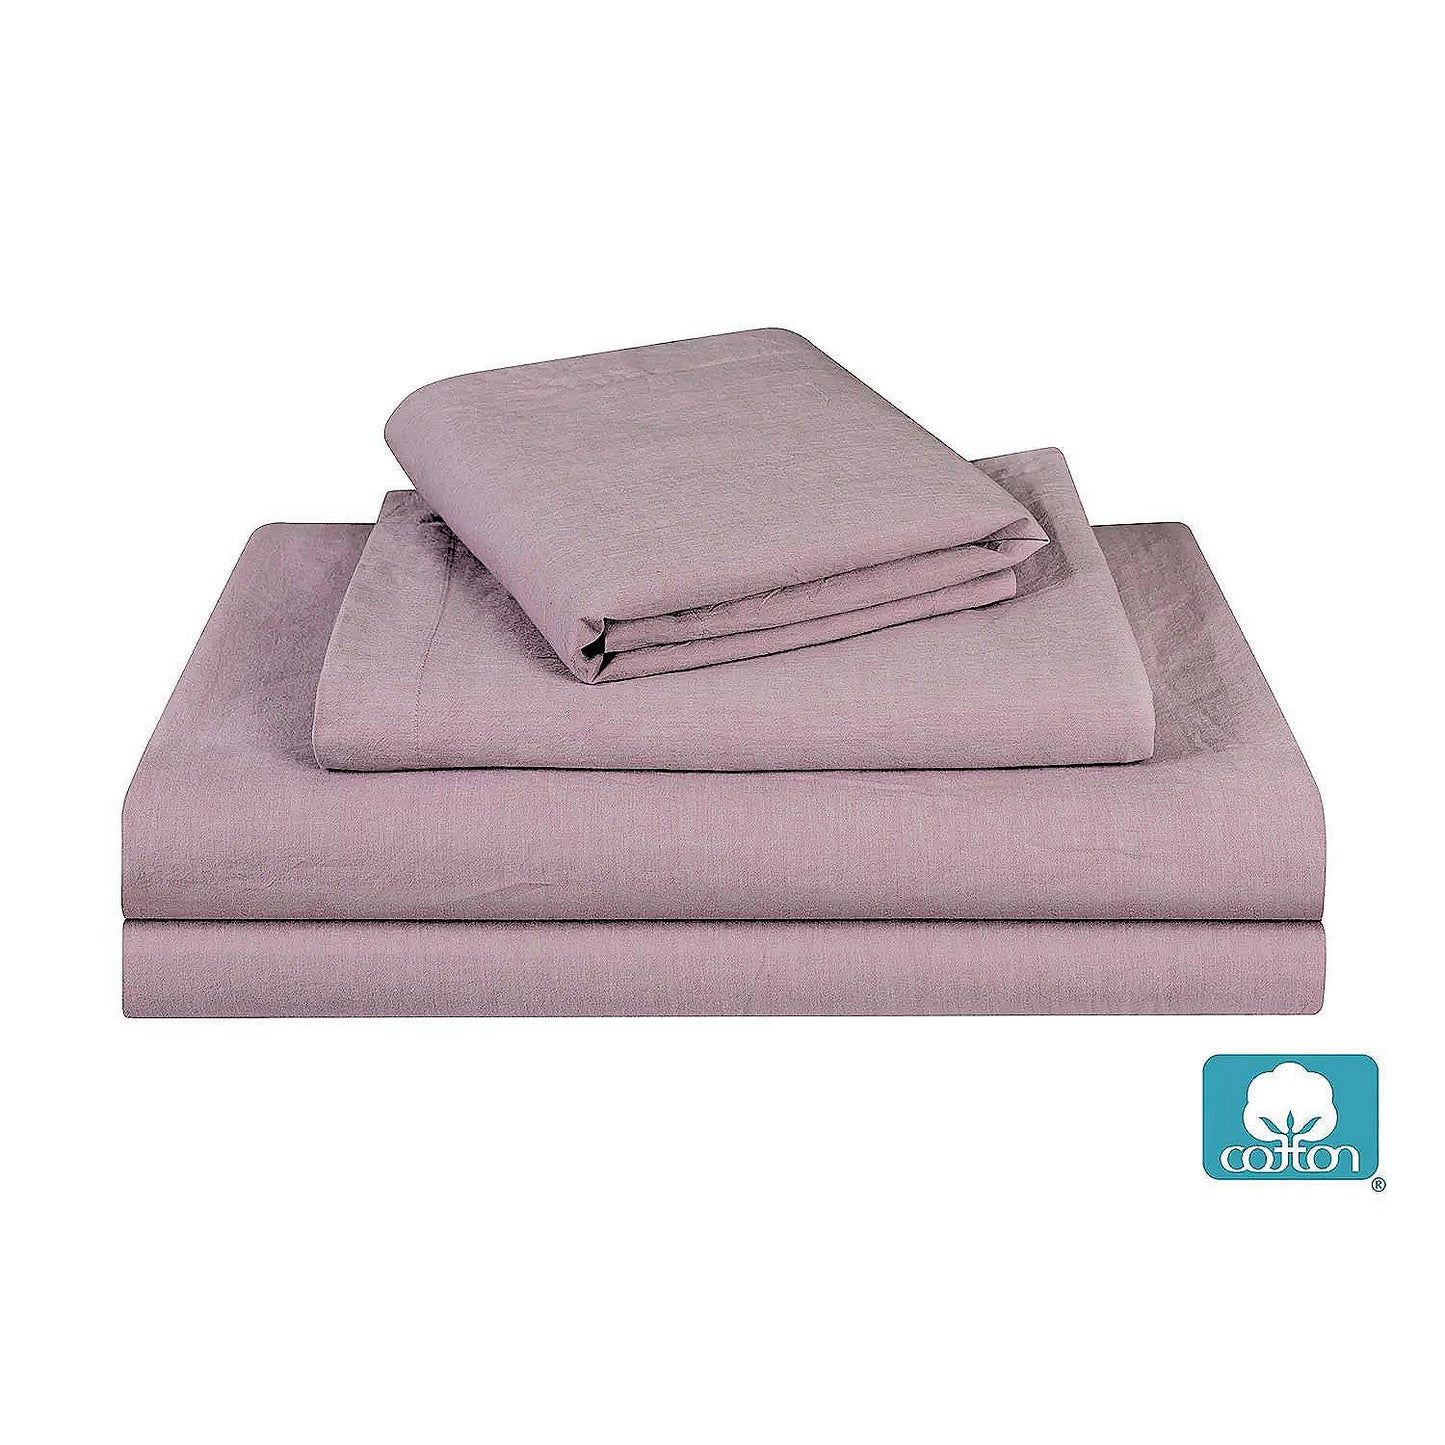 Swift Home Pre-Washed Cotton Chambray Duvet Cover and Sham Bedding Set Dusty Lavender Twin Twin XL